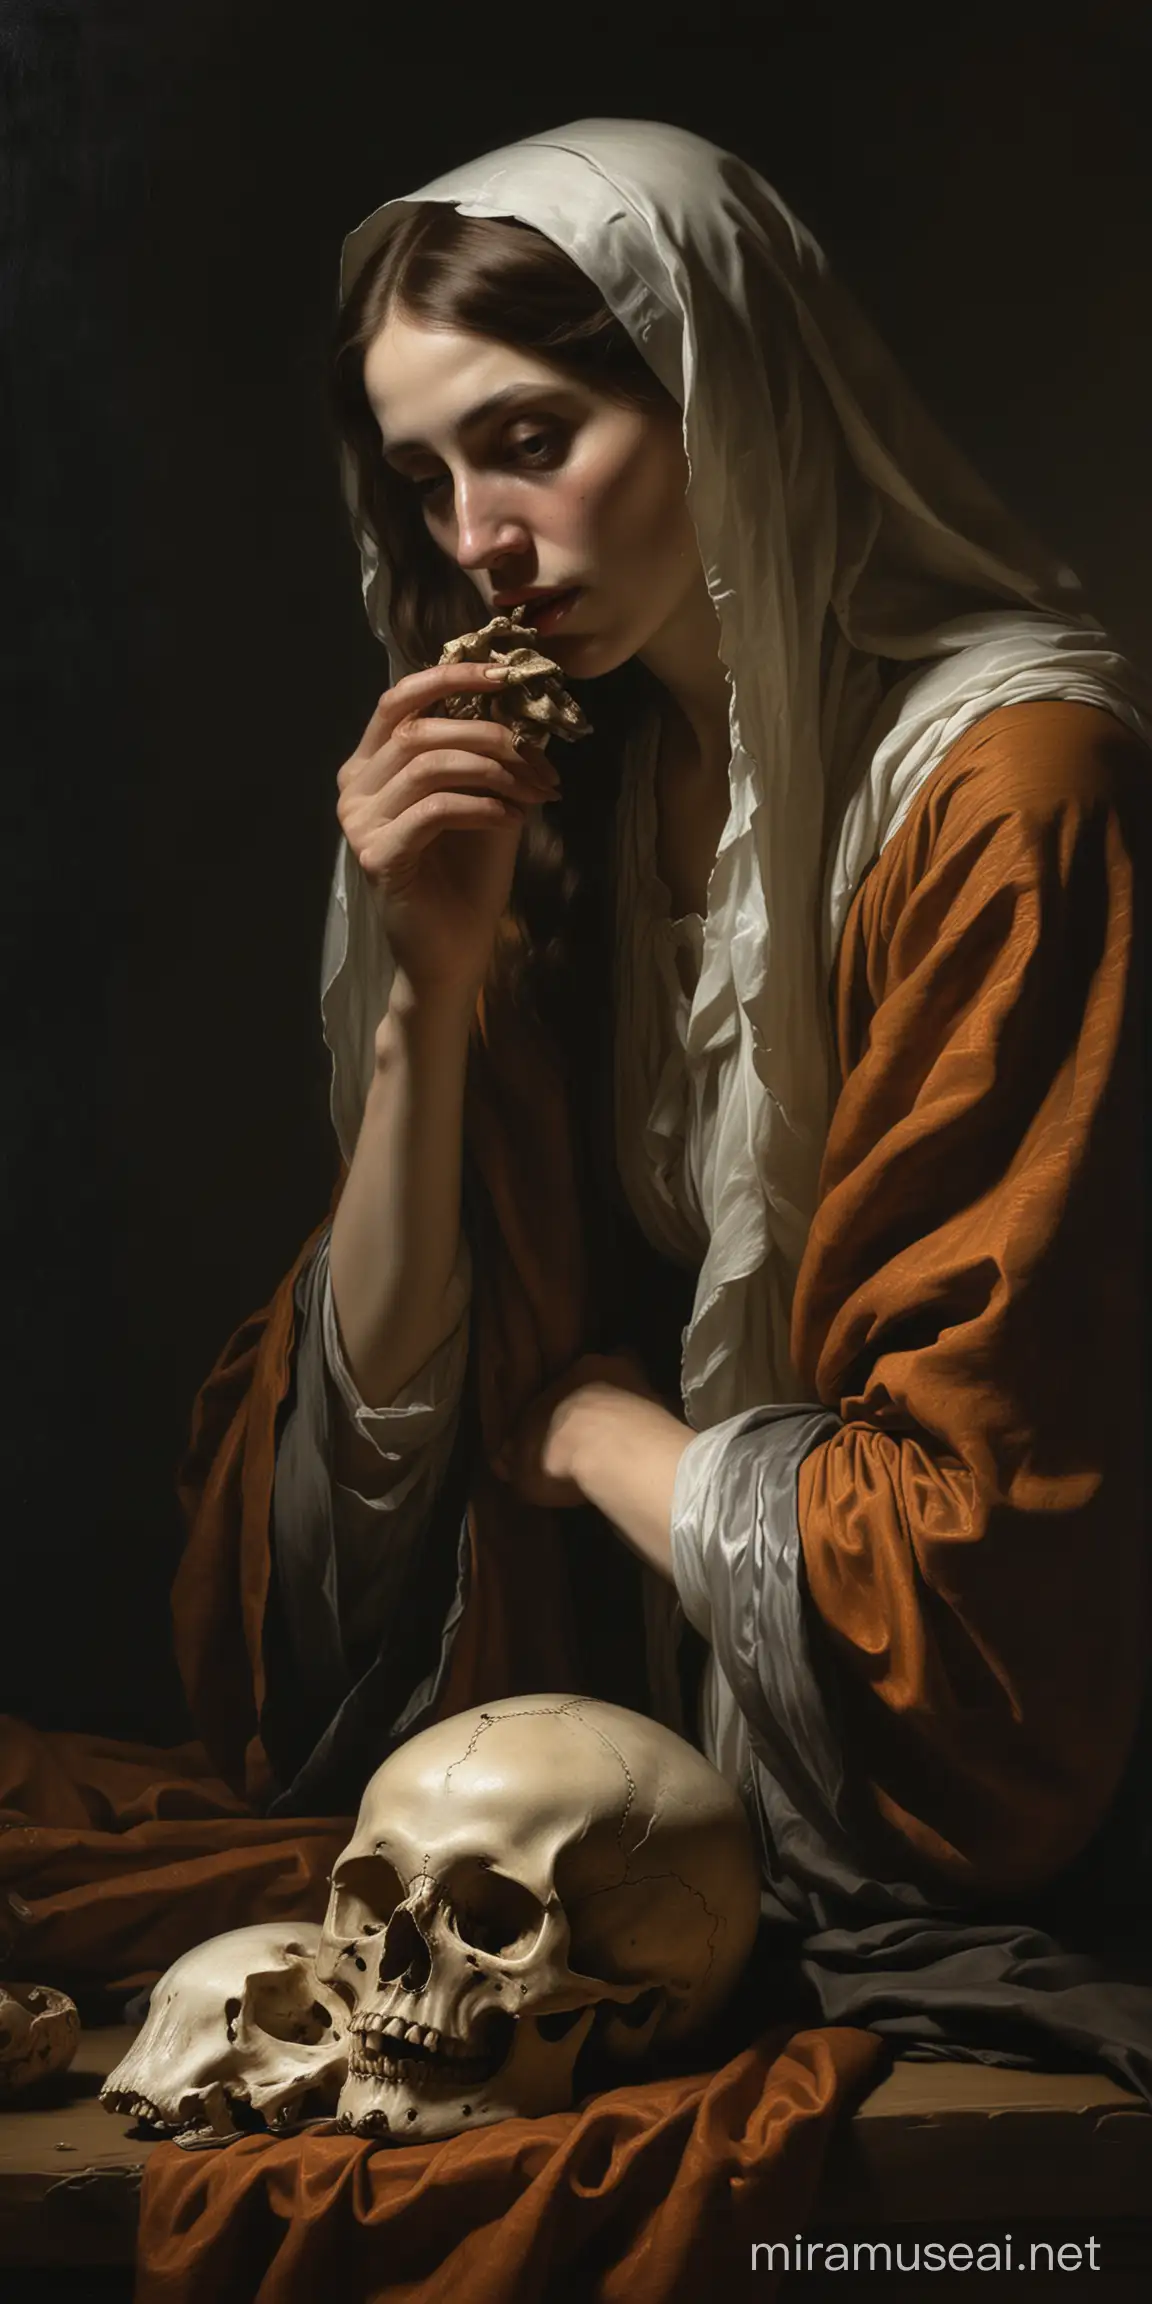 painting that will show the penitent Mary Magdalene holding a skull and looking to it, in a Rembrandt style, Dramatic use of light and shadow, a technique known as chiaroscuro, This creates a striking contrast between light and dark areas, often highlighting the focal point of the painting, His compositions often convey deep emotional or narrative intensity, Rembrandt's color palette is typically rich but subdued, featuring earthy tones and warm colors, His brushwork is renowned for its expressiveness and texture, ranging from smooth and finely detailed in areas of focus to more loose and impressionistic in other parts,